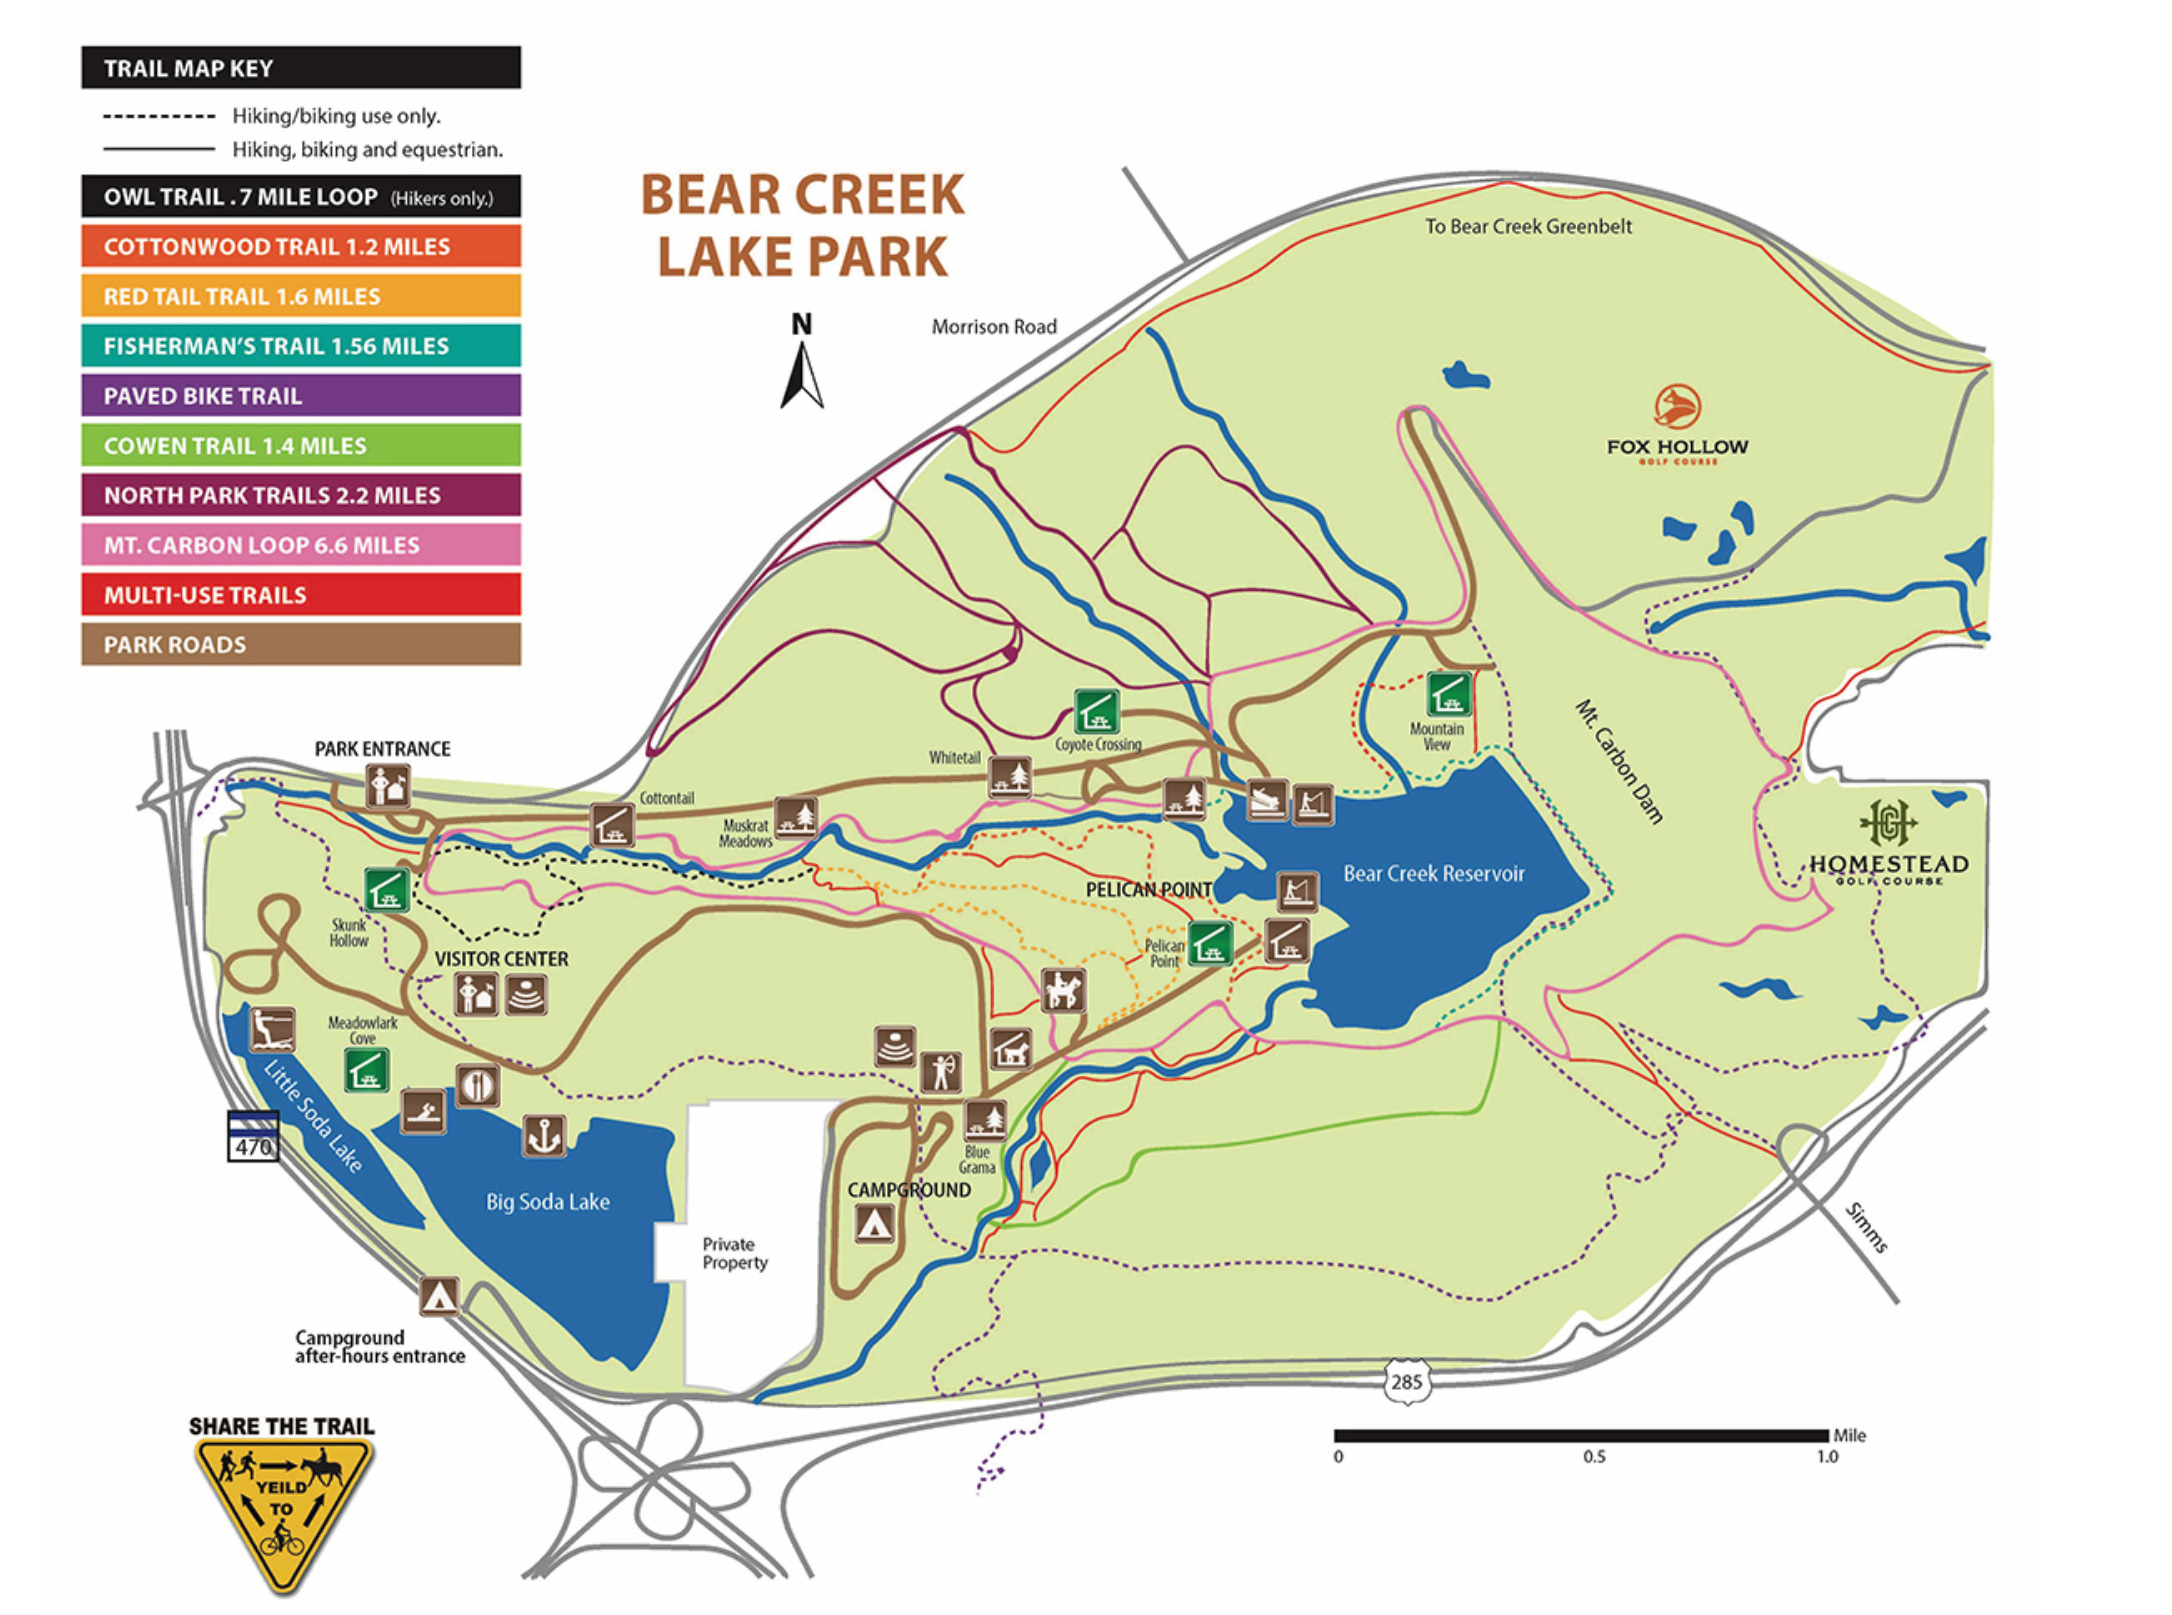 a map of bear creek lake park showing trails, roads, and waterways